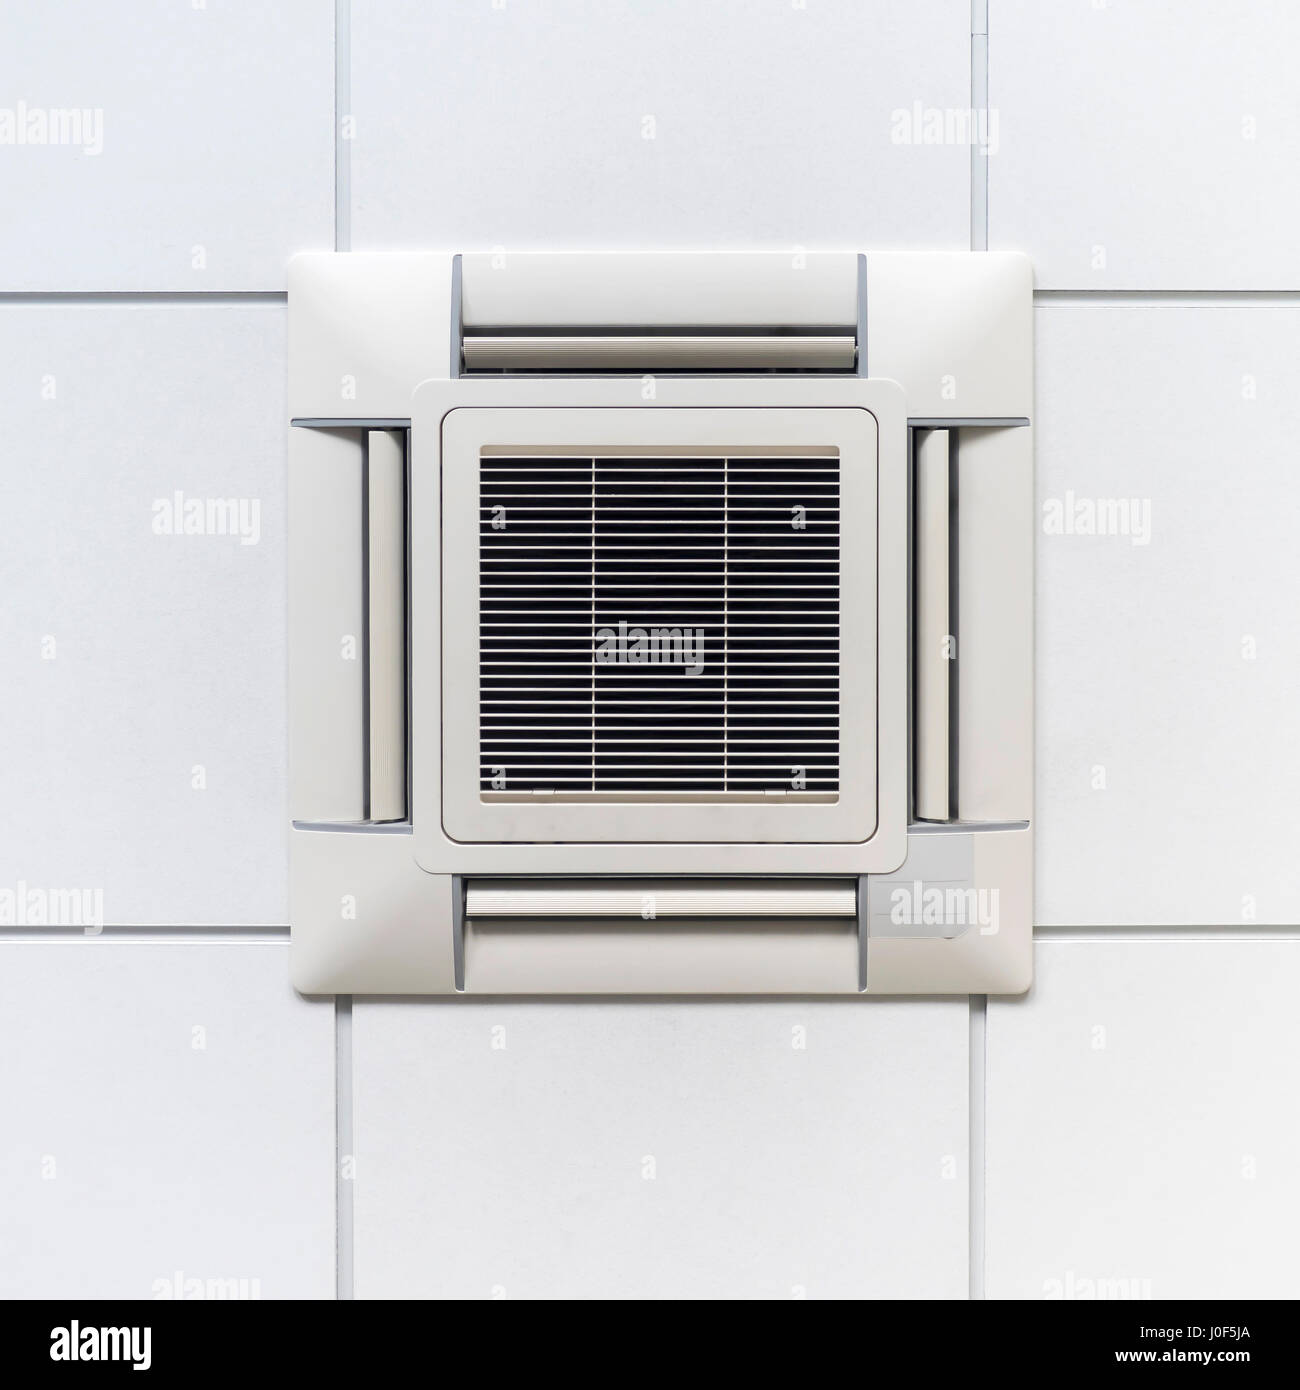 Air Conditioner for climate control on ceiling, modern design for office or industry. Stock Photo